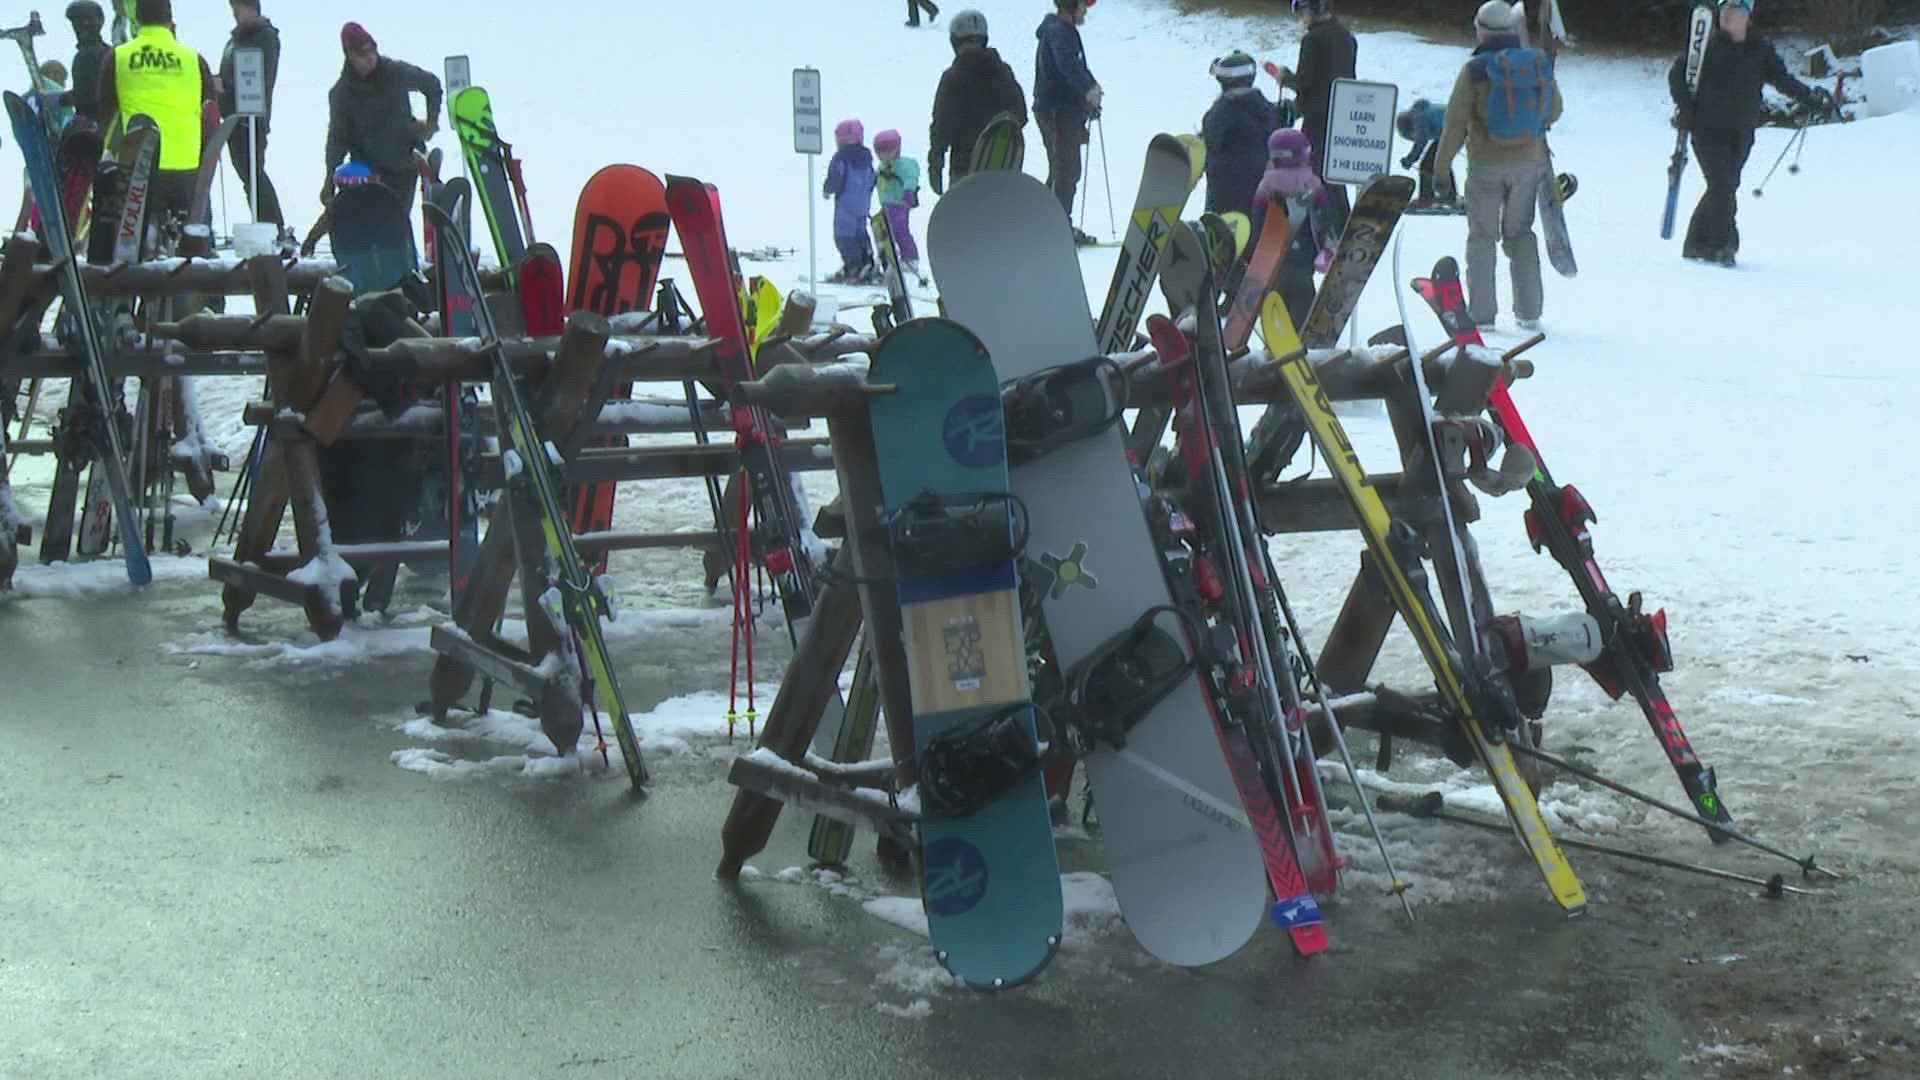 Winter sports are off to a rough start, high school ski teams across Maine may not be getting the season they had wished for.